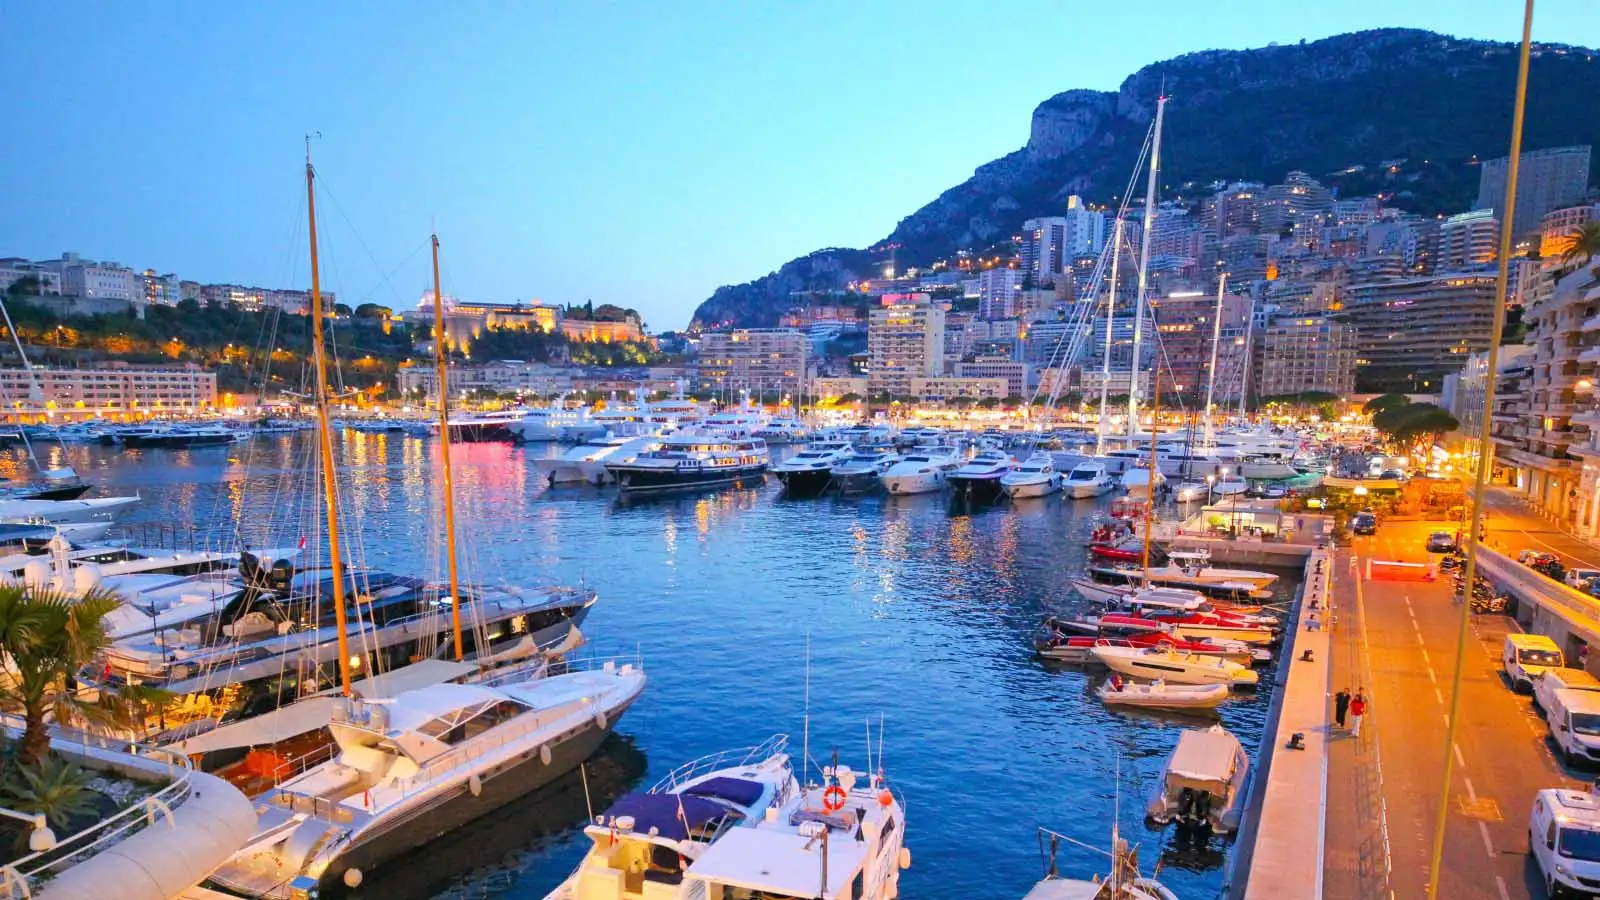 A view of Monaco in the evening. F1